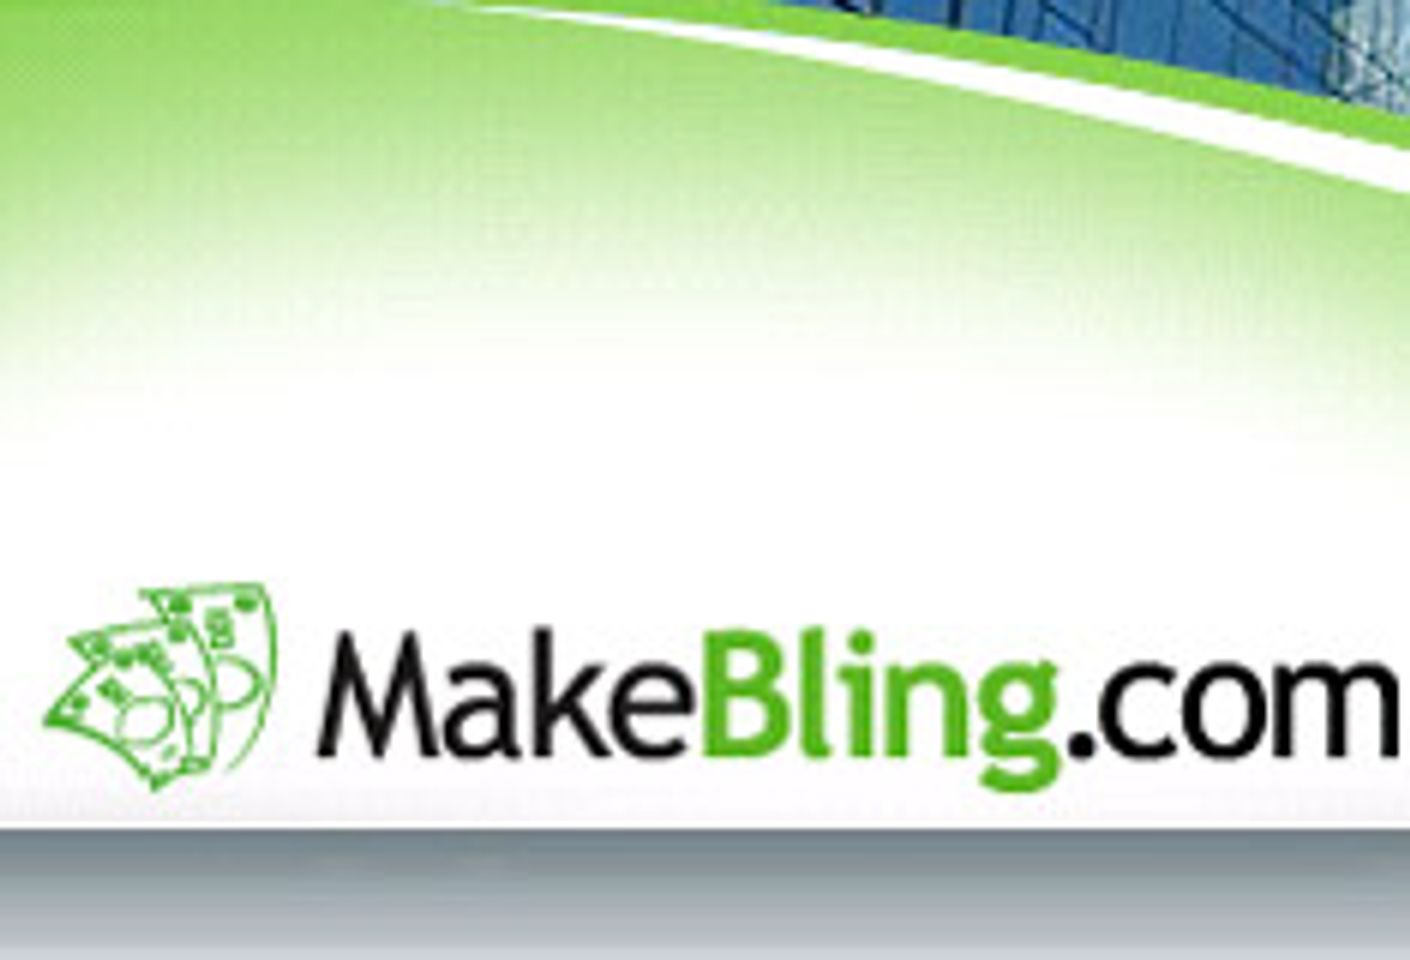 MakeBling.com Busts Out 2.0, New Sites